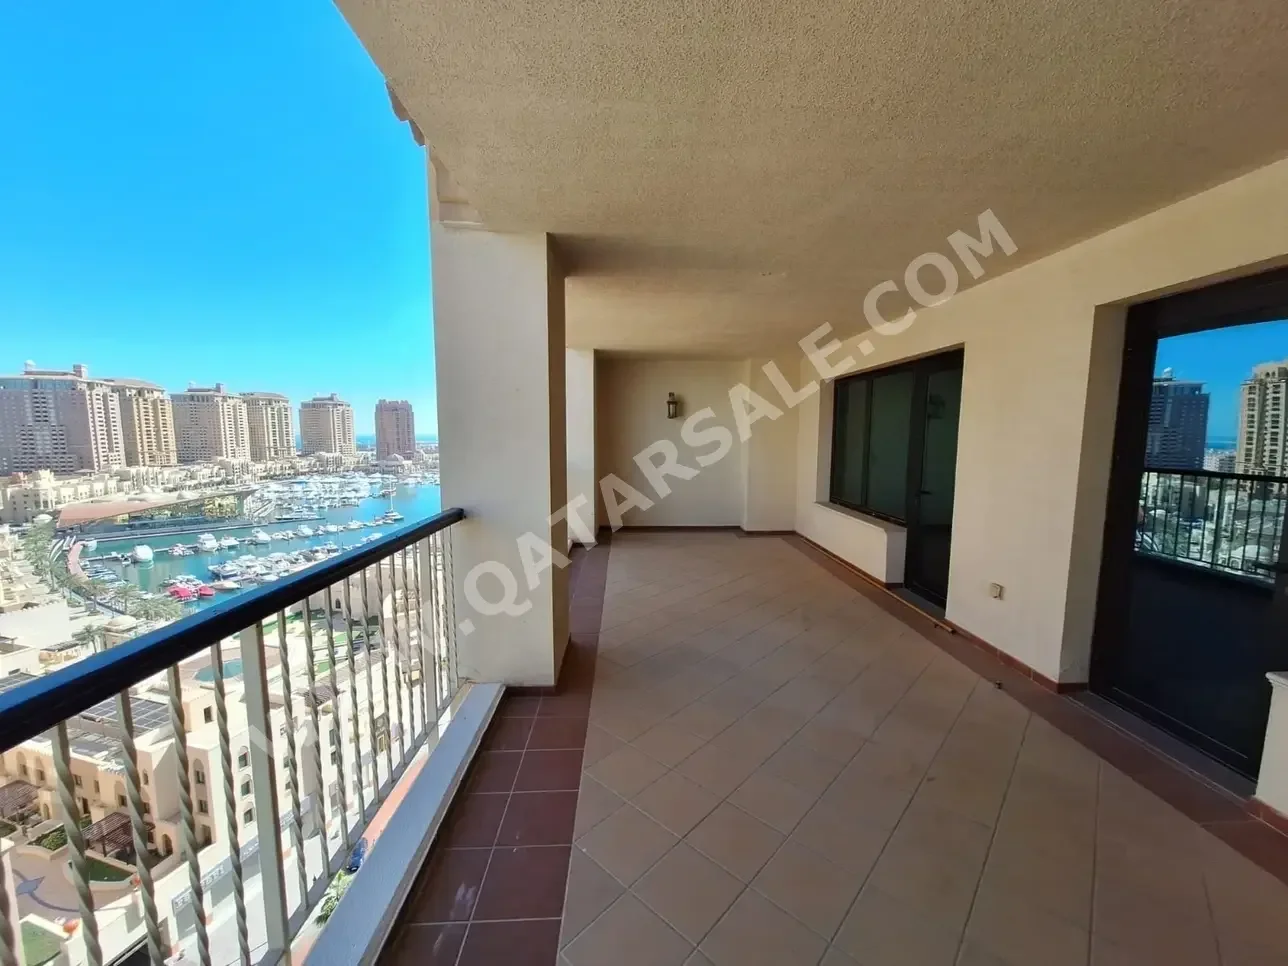 2 Bedrooms  Apartment  For Rent  Doha -  The Pearl  Semi Furnished